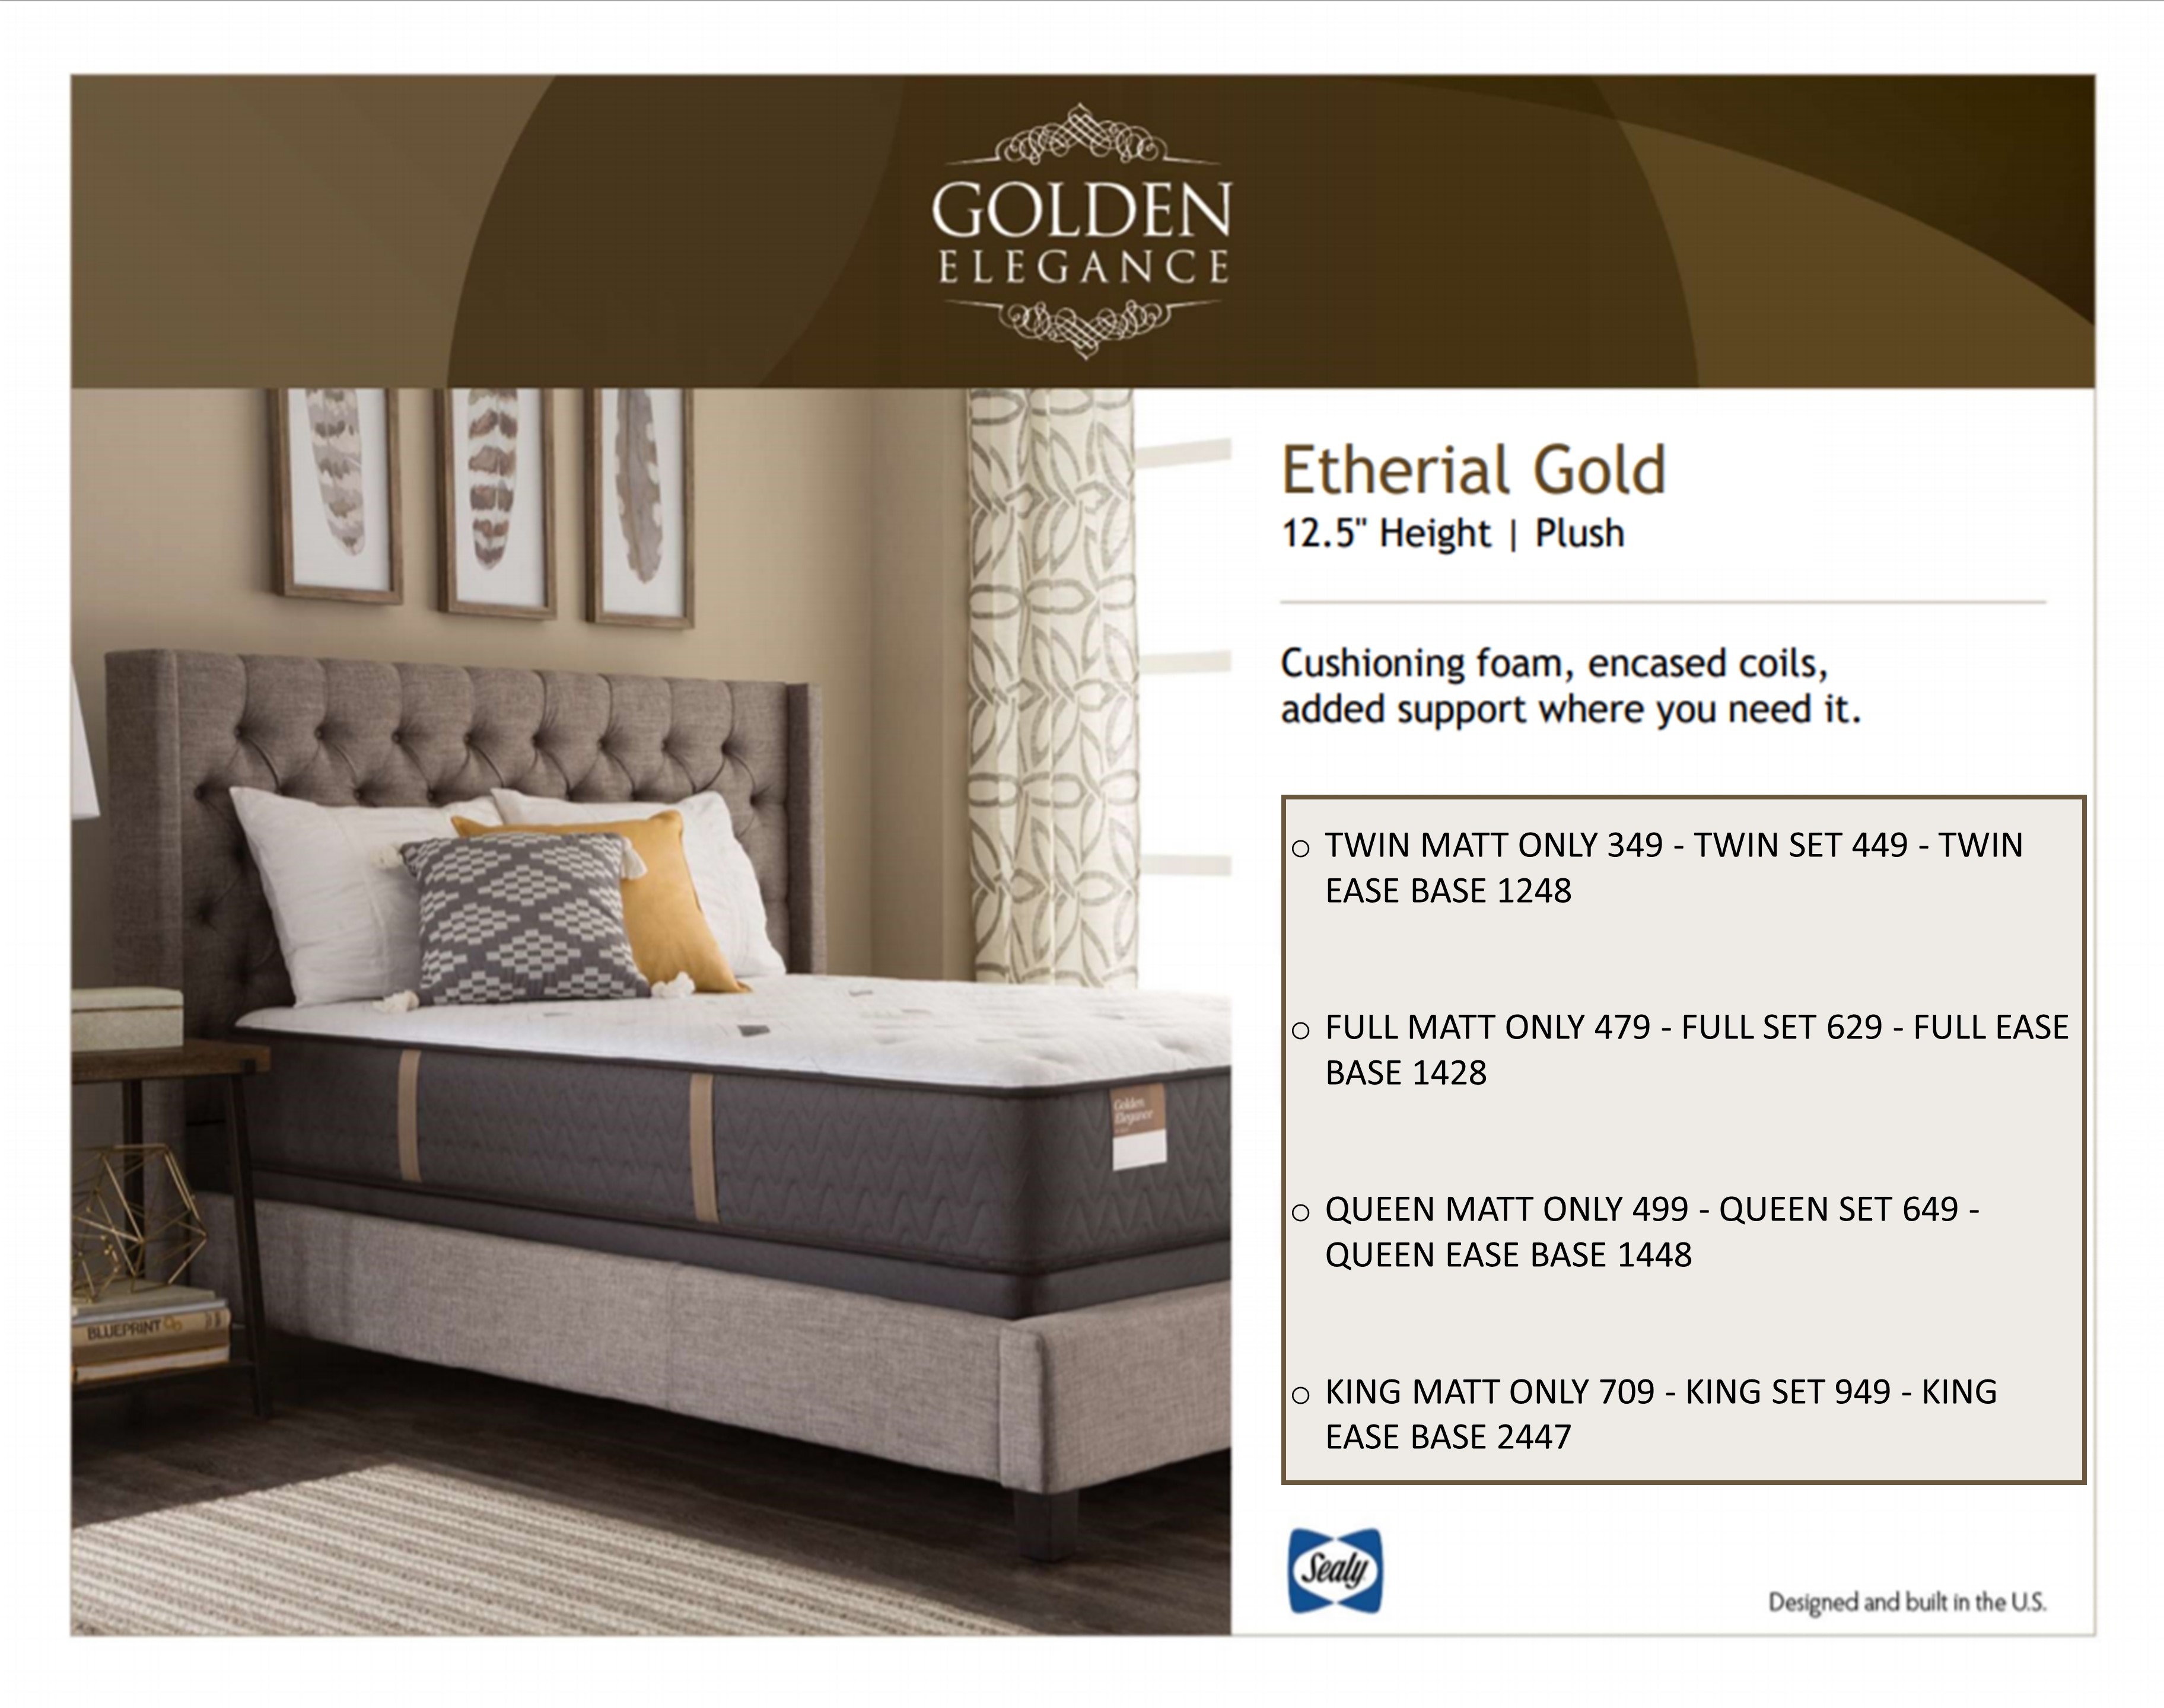 sealy etherial gold mattress